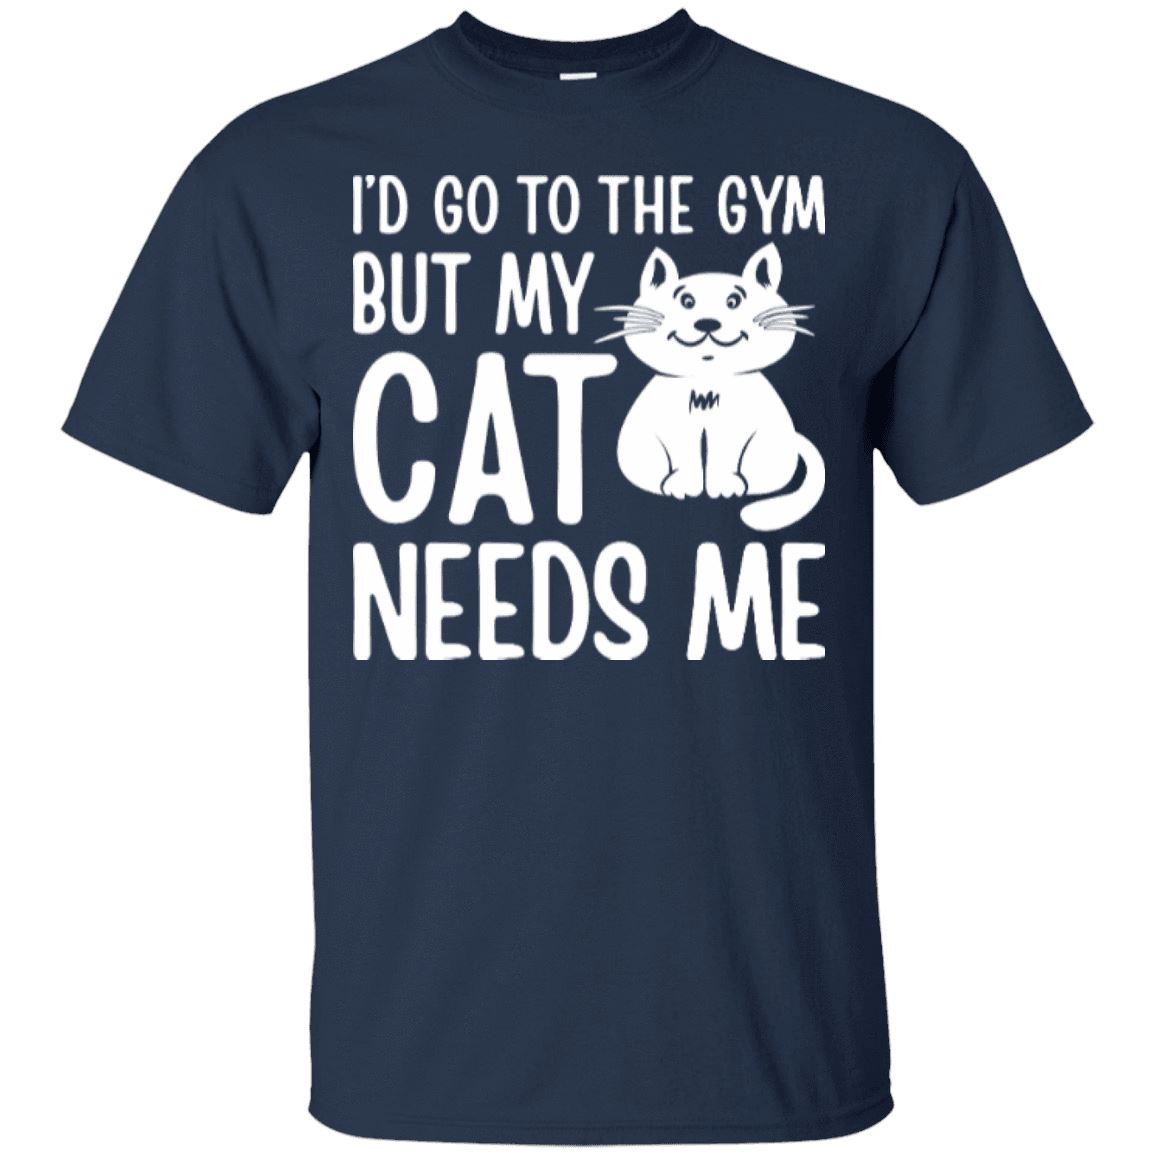 I Just Want To Workout And Hang With My Cat Funny Fitness Gift T